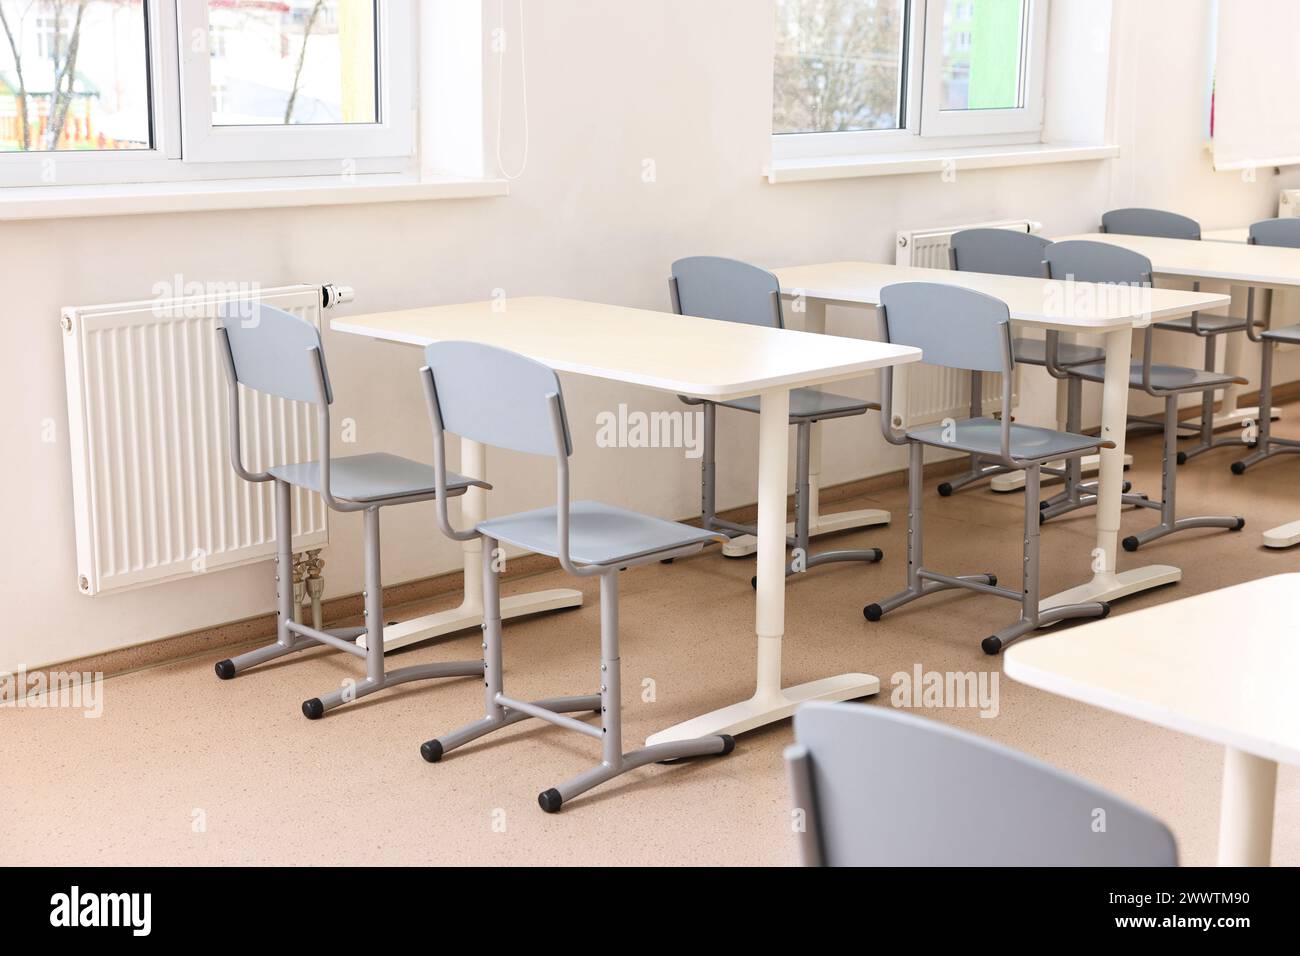 Empty school classroom with desks and chairs Stock Photo